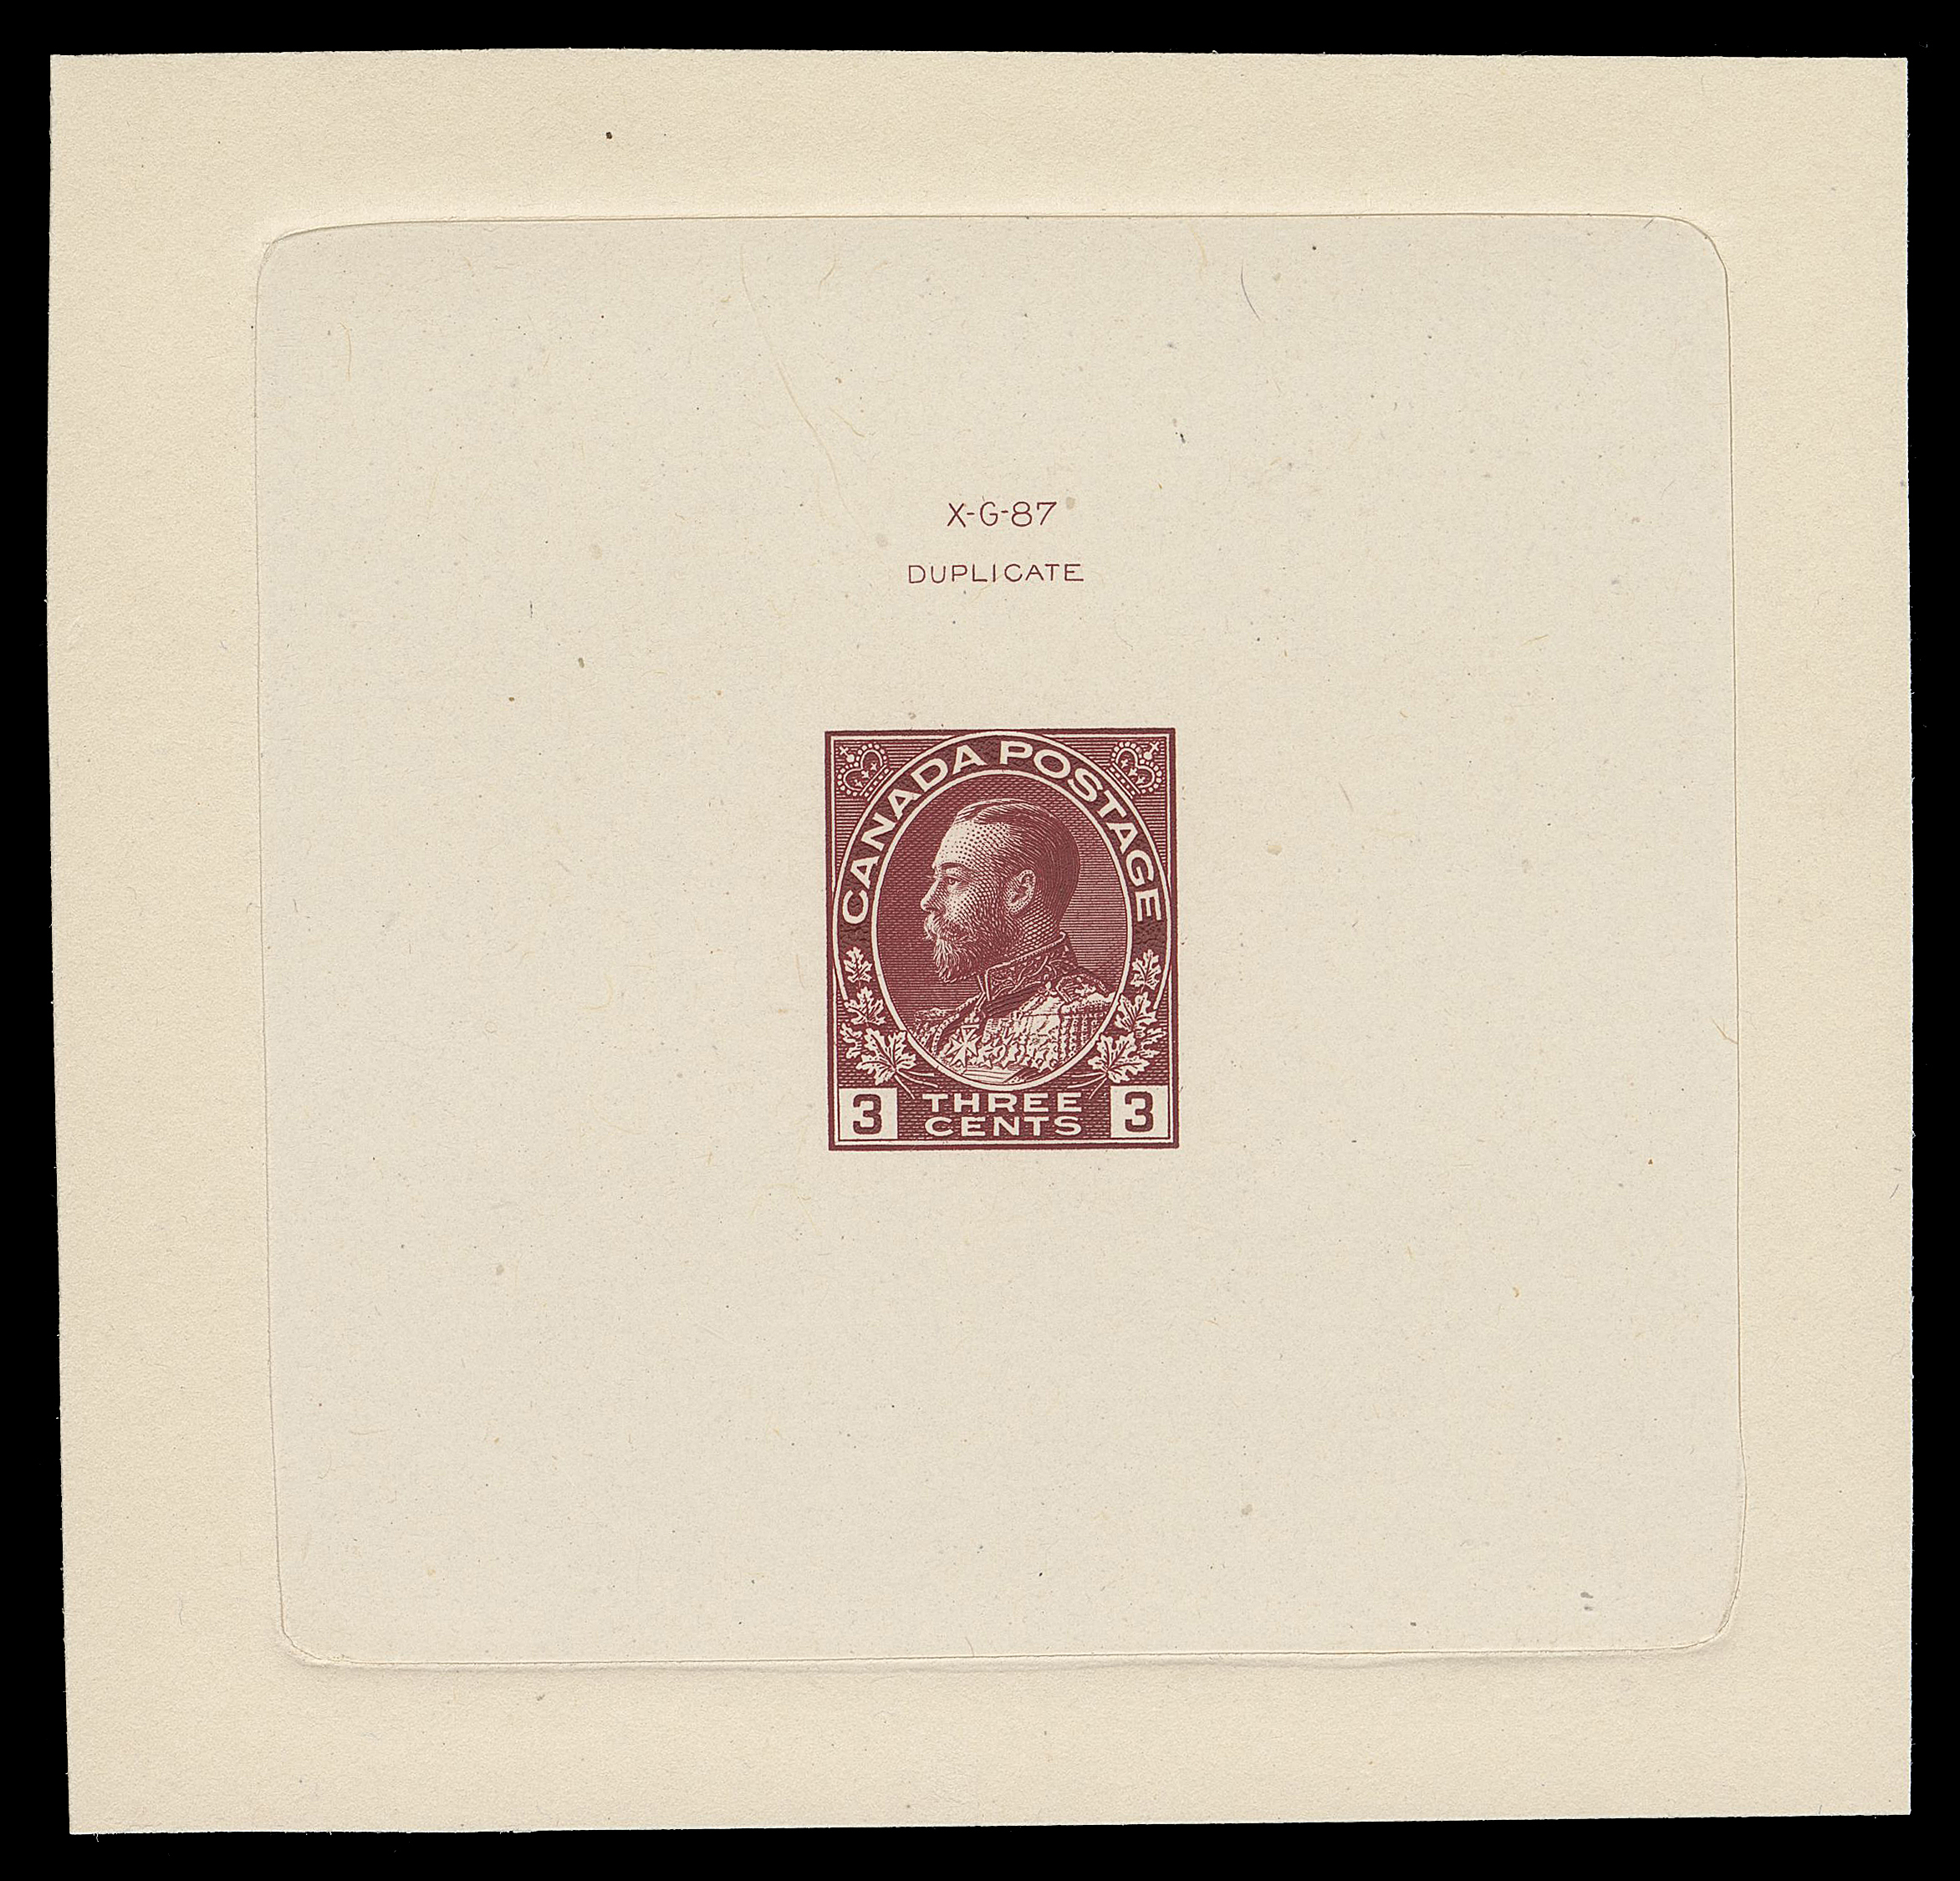 ADMIRAL PROOFS  109c,A superb Die Proof printed in dark carmine on india paper 75 x 73mm, die sunk on slightly larger card 95 x 90mm, showing die "XG-87" and "DUPLICATE" imprint above design. An under-rated and extremely rare Die Proof, absent in most collections of the past; in pristine condition, XF (Minuse & Pratt 109 C P1)

Provenance: American Bank Note Company Archives, Christie